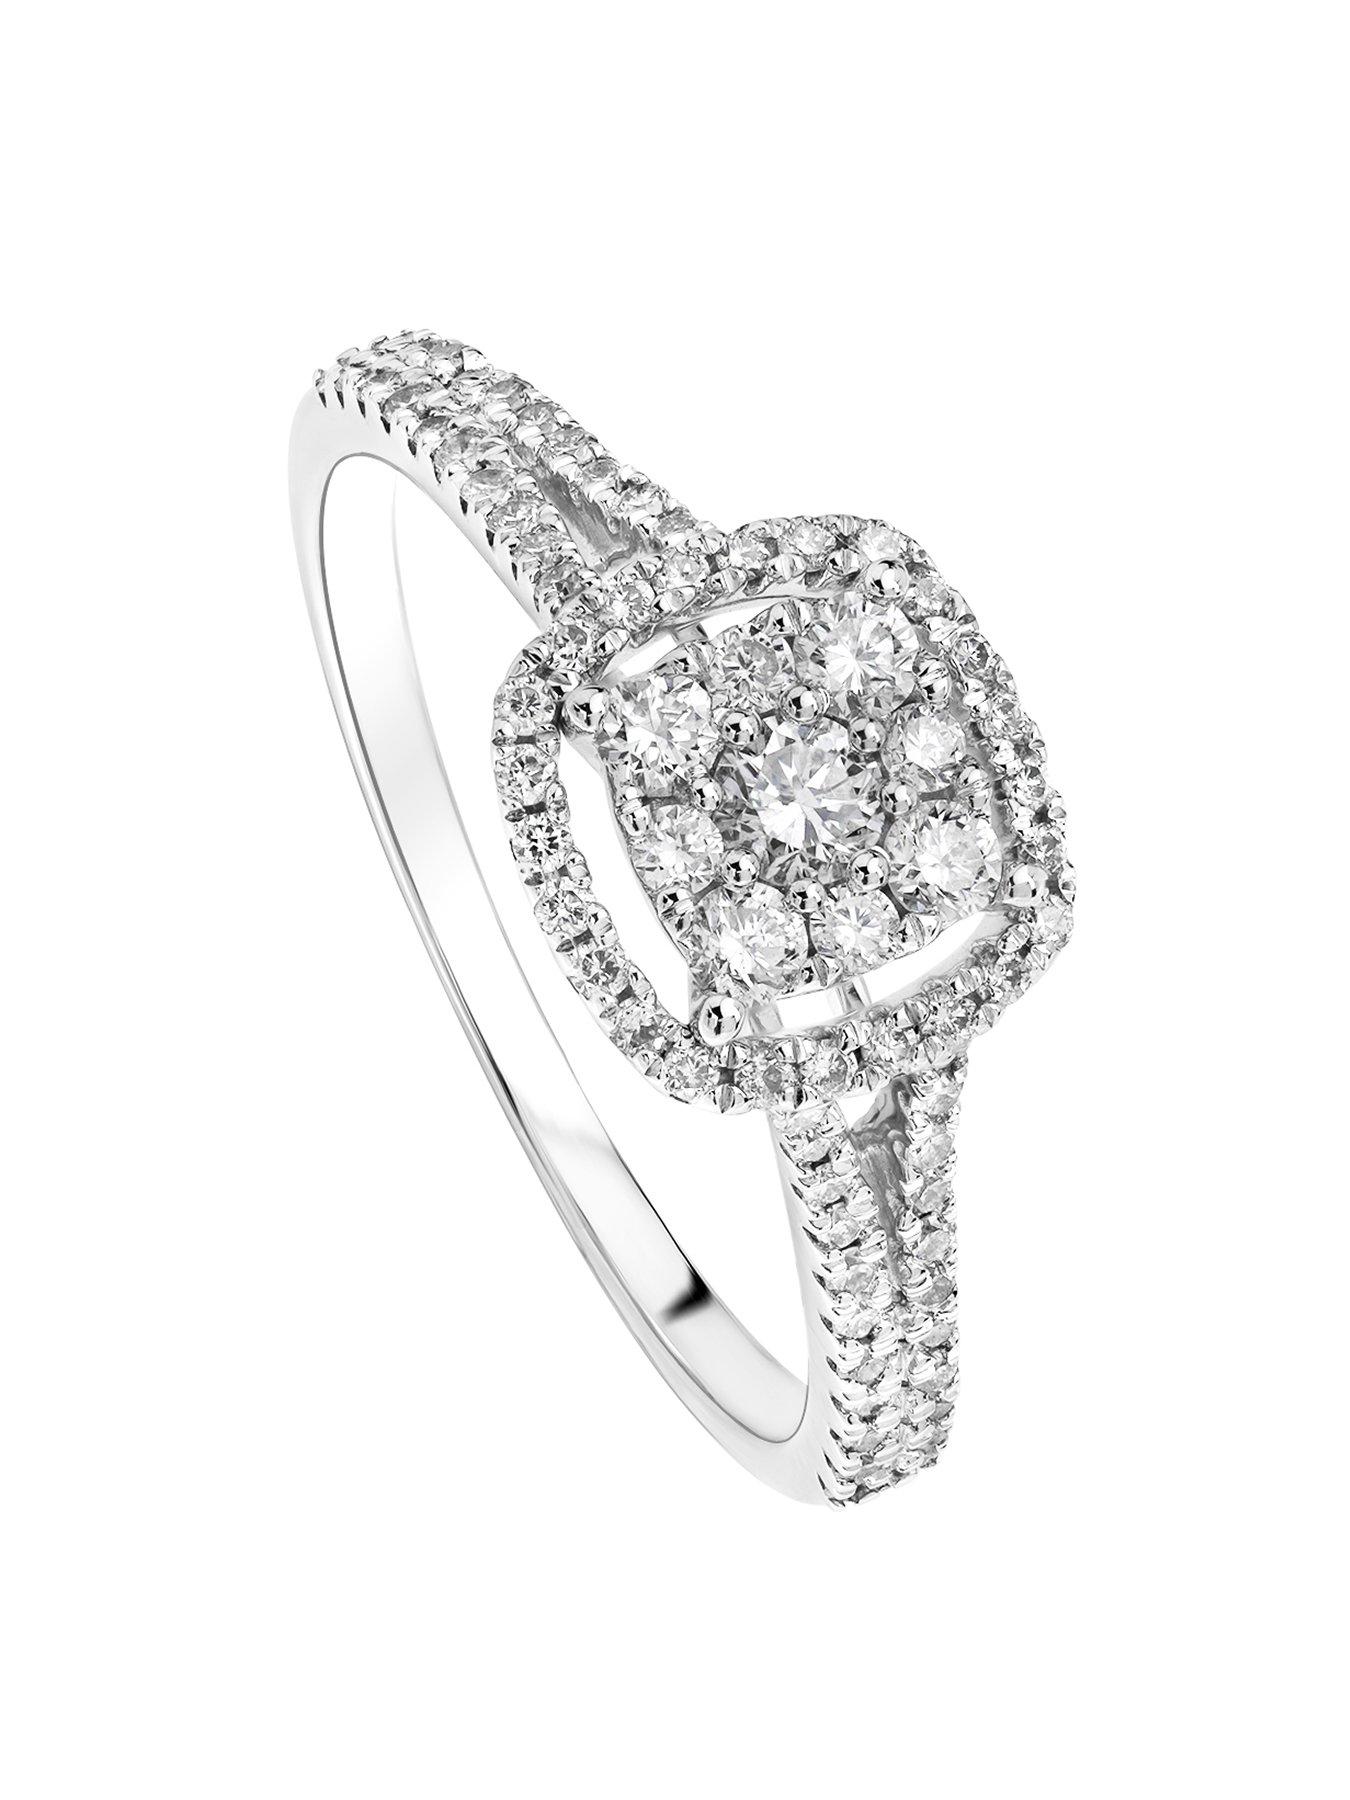 Details about   1.30ct Round Cut Diamond Three Shank Engagement Wedding Ring 925 Sterling Silver 